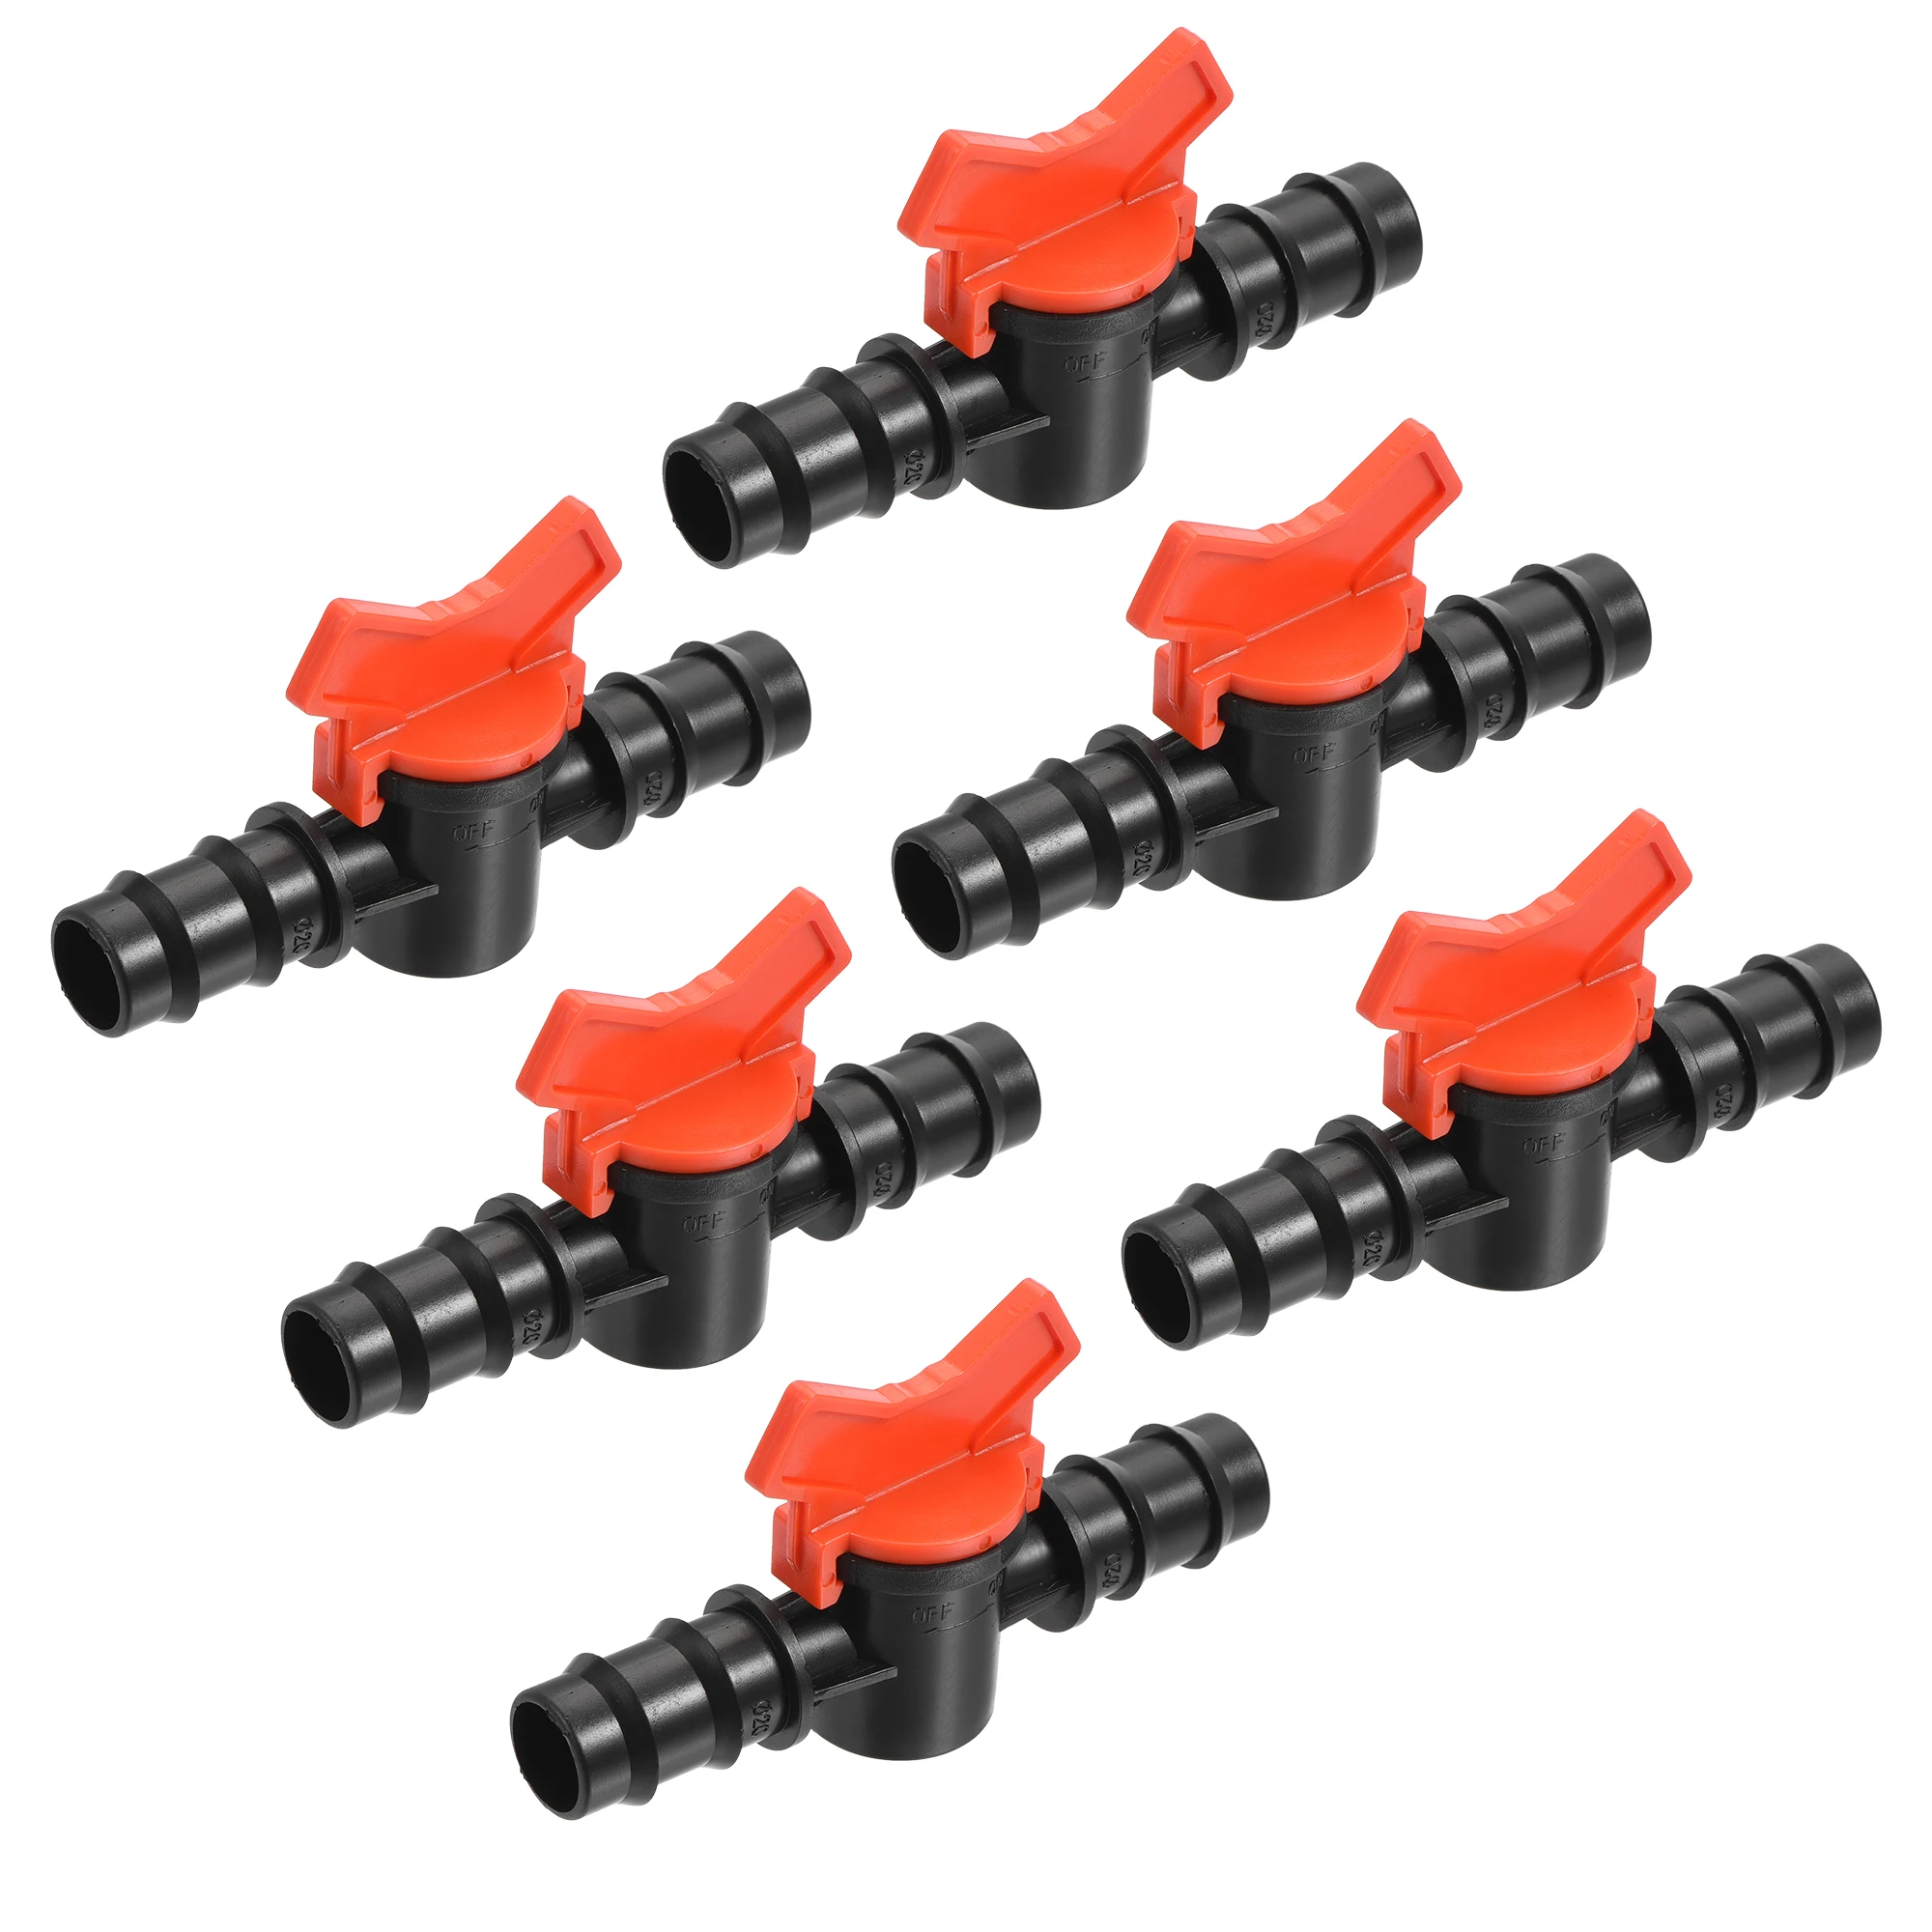 

Uxcell Ball Valve 20mm Barb Connector Shut Off Switch Plastic for Irrigation Drip Tube 6 Pack